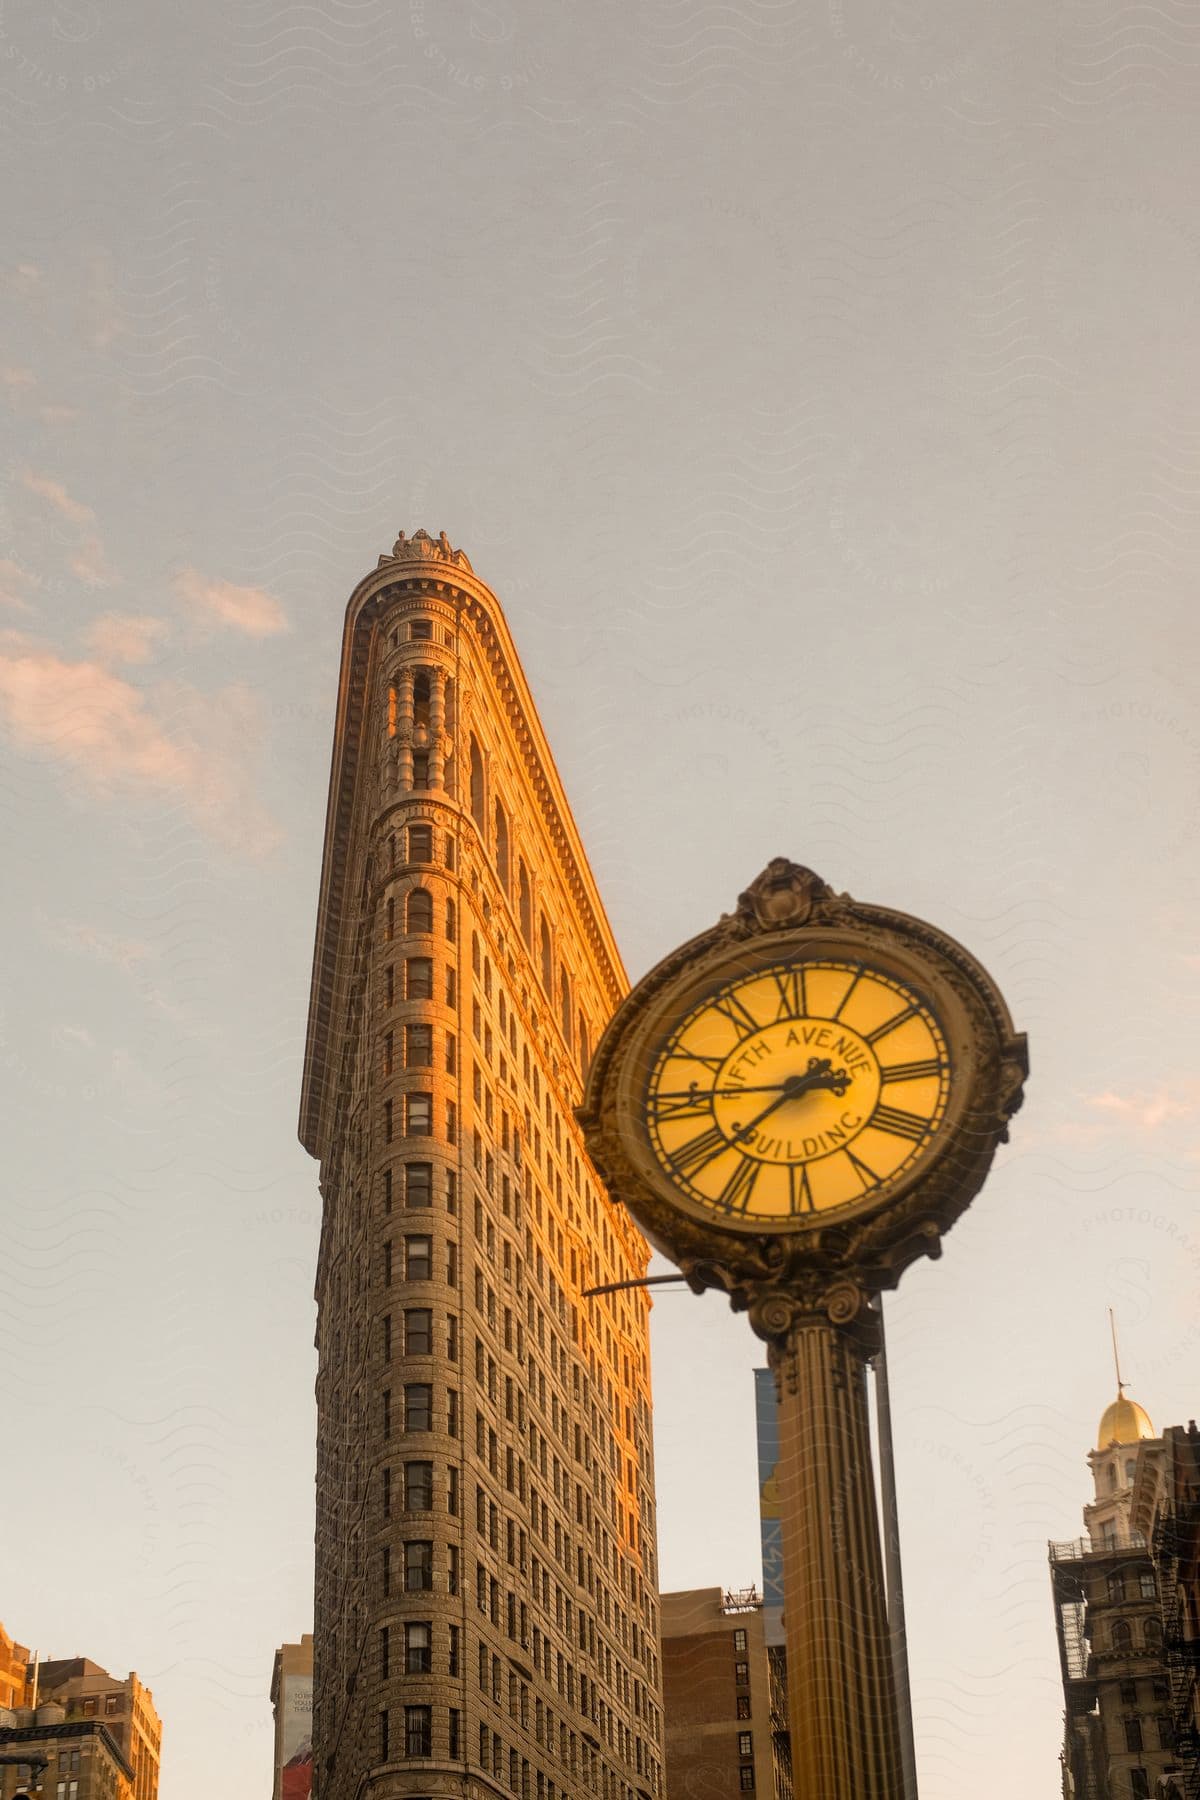 The photo features a wellknown new york city landmark the flatiron building with a clock on its tower against a cloudy sky